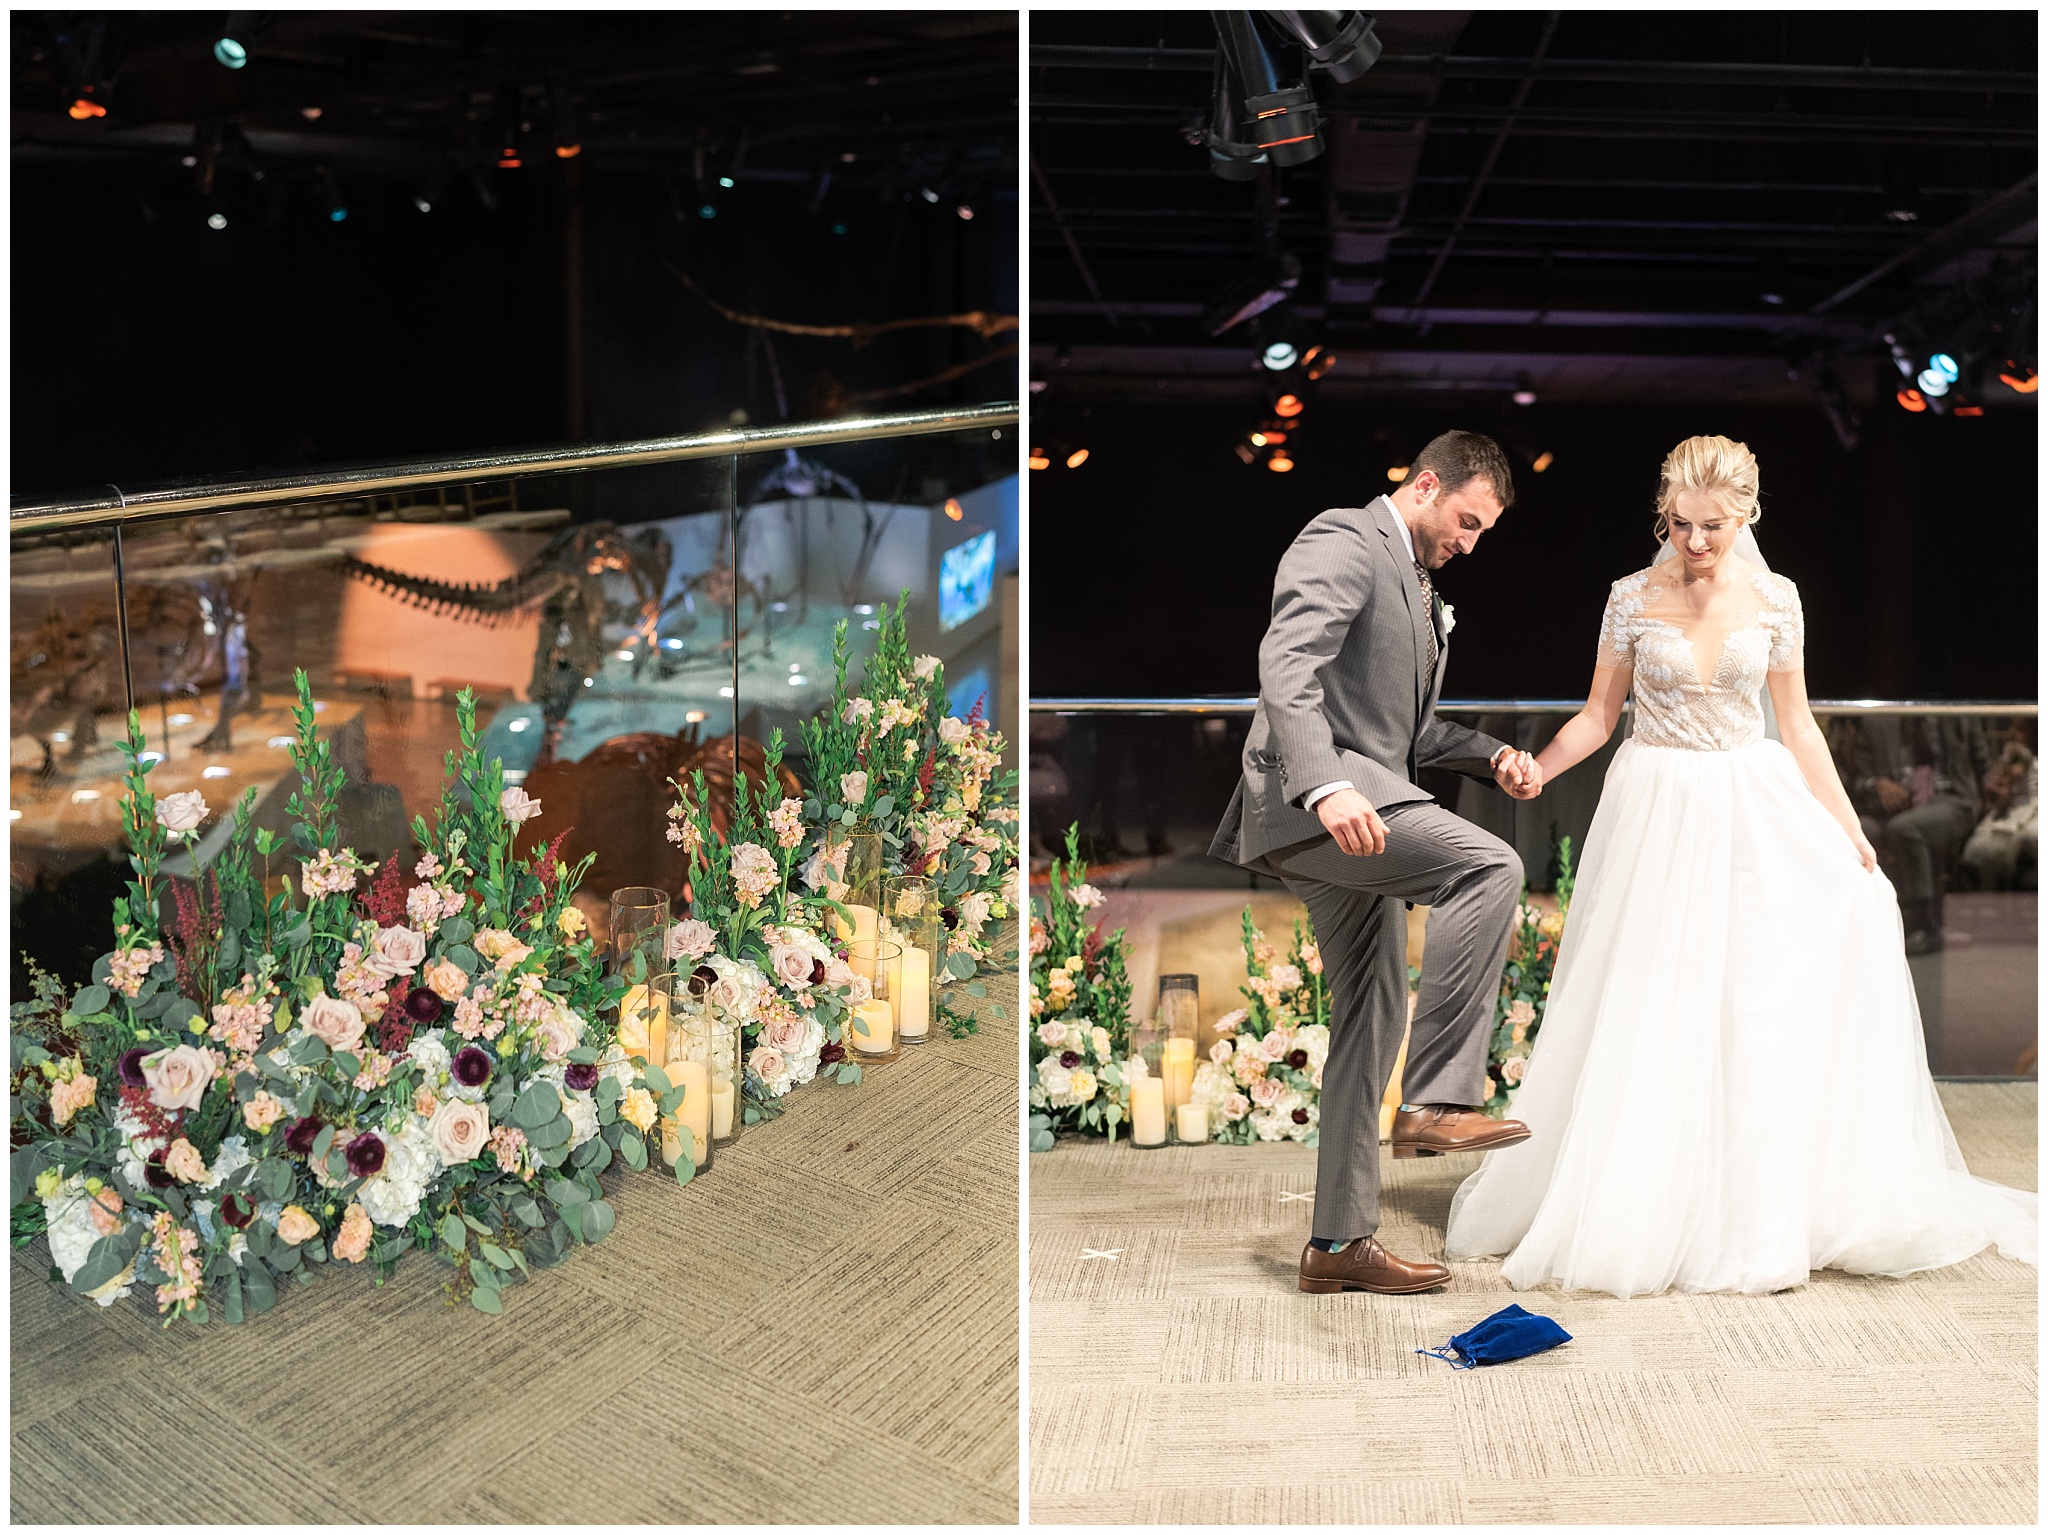 wedding ceremony at houston museum of natural science by Houston's best wedding photographers Swish and Click Photography